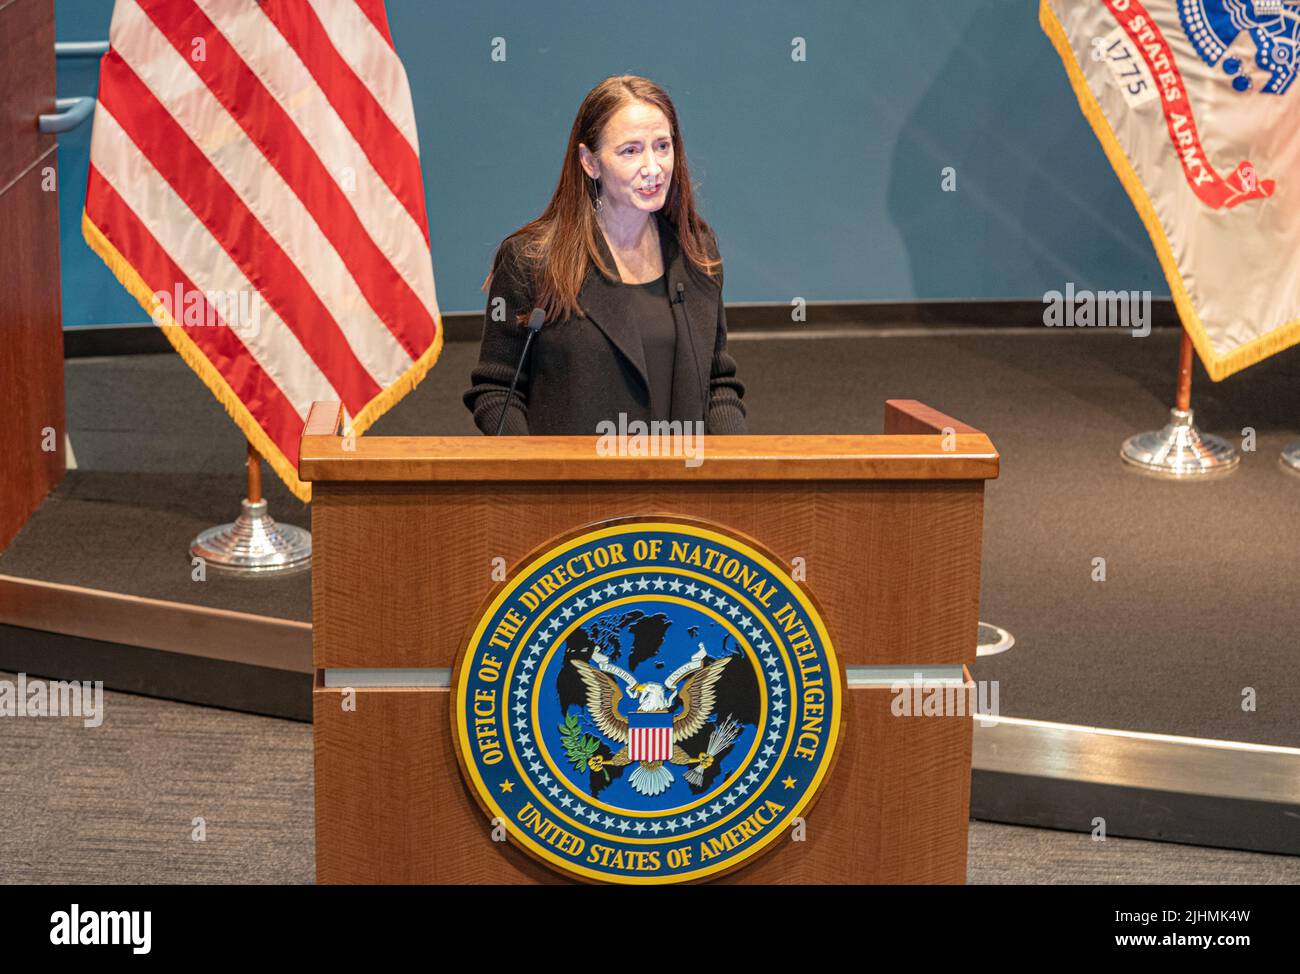 McLean, United States of America. 18 July, 2022. Avril Haines, Director of National Intelligence introduces U.S. Secretary of State Antony Blinken, to deliver remarks at the Office of National Intelligence, July 18, 2022 in McLean, Virginia. Credit: Freddie Everett/State Department/Alamy Live News Stock Photo